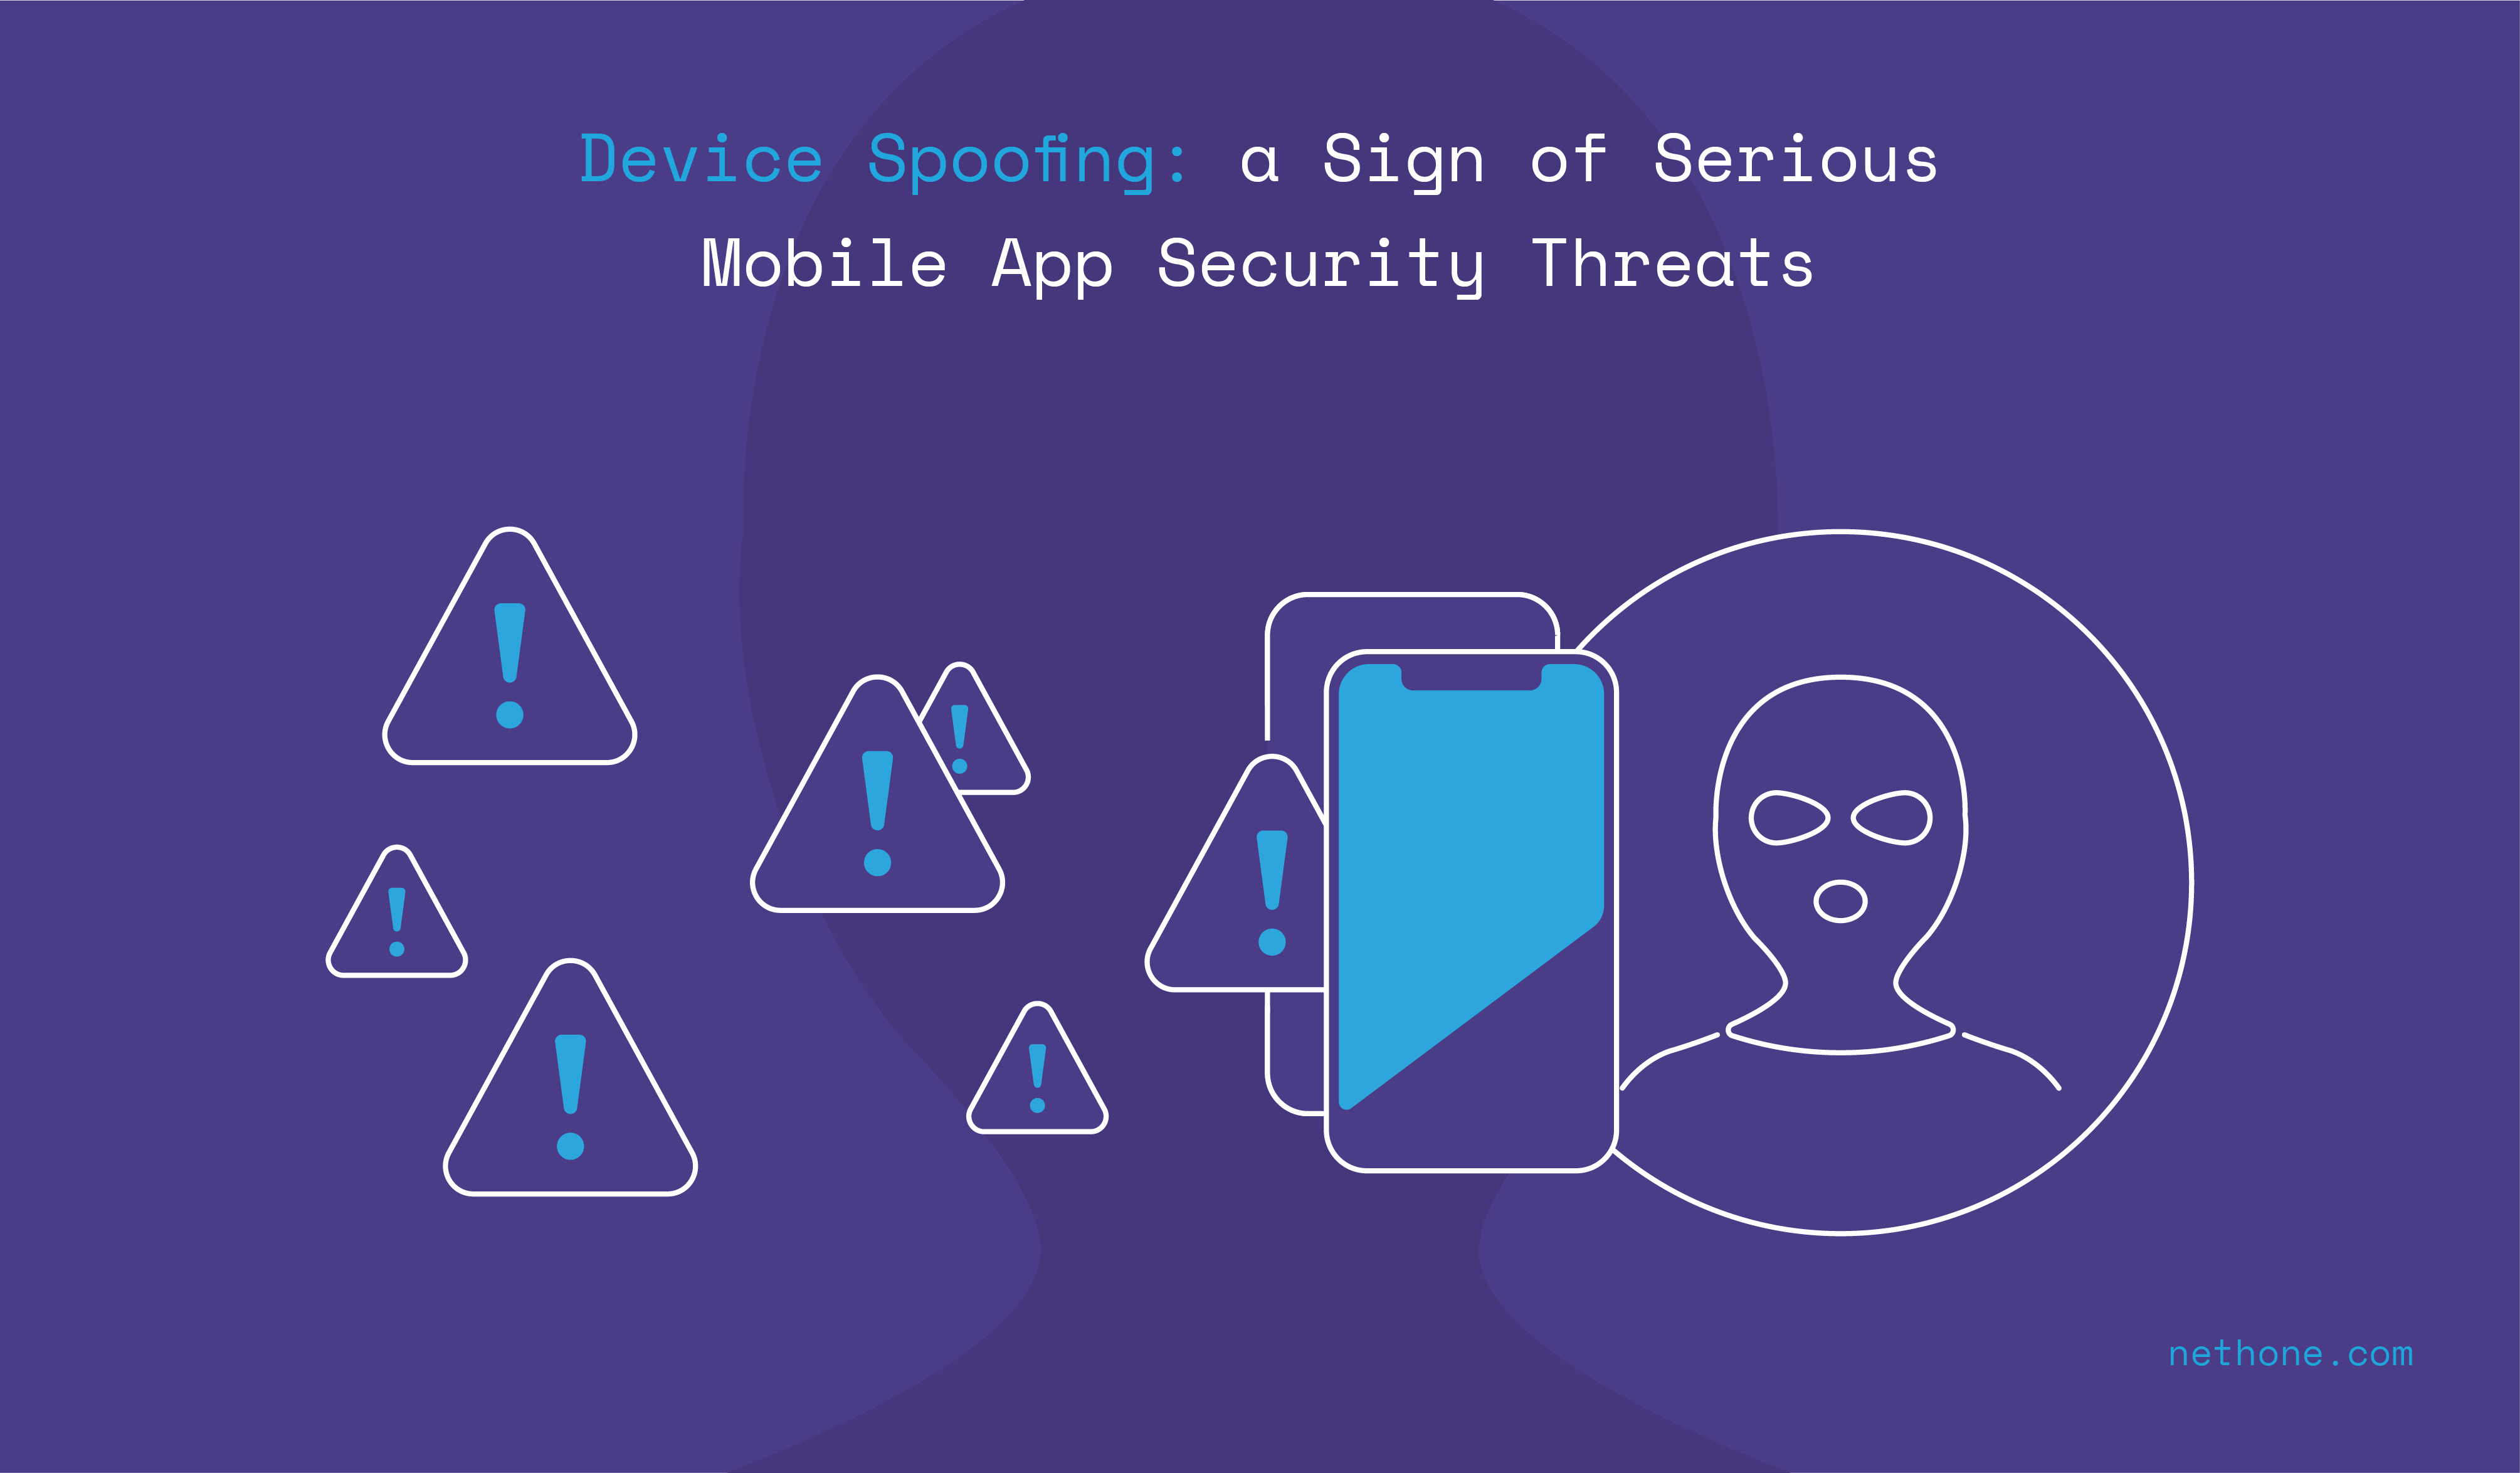 Device Spoofing sign of mobile app security threats